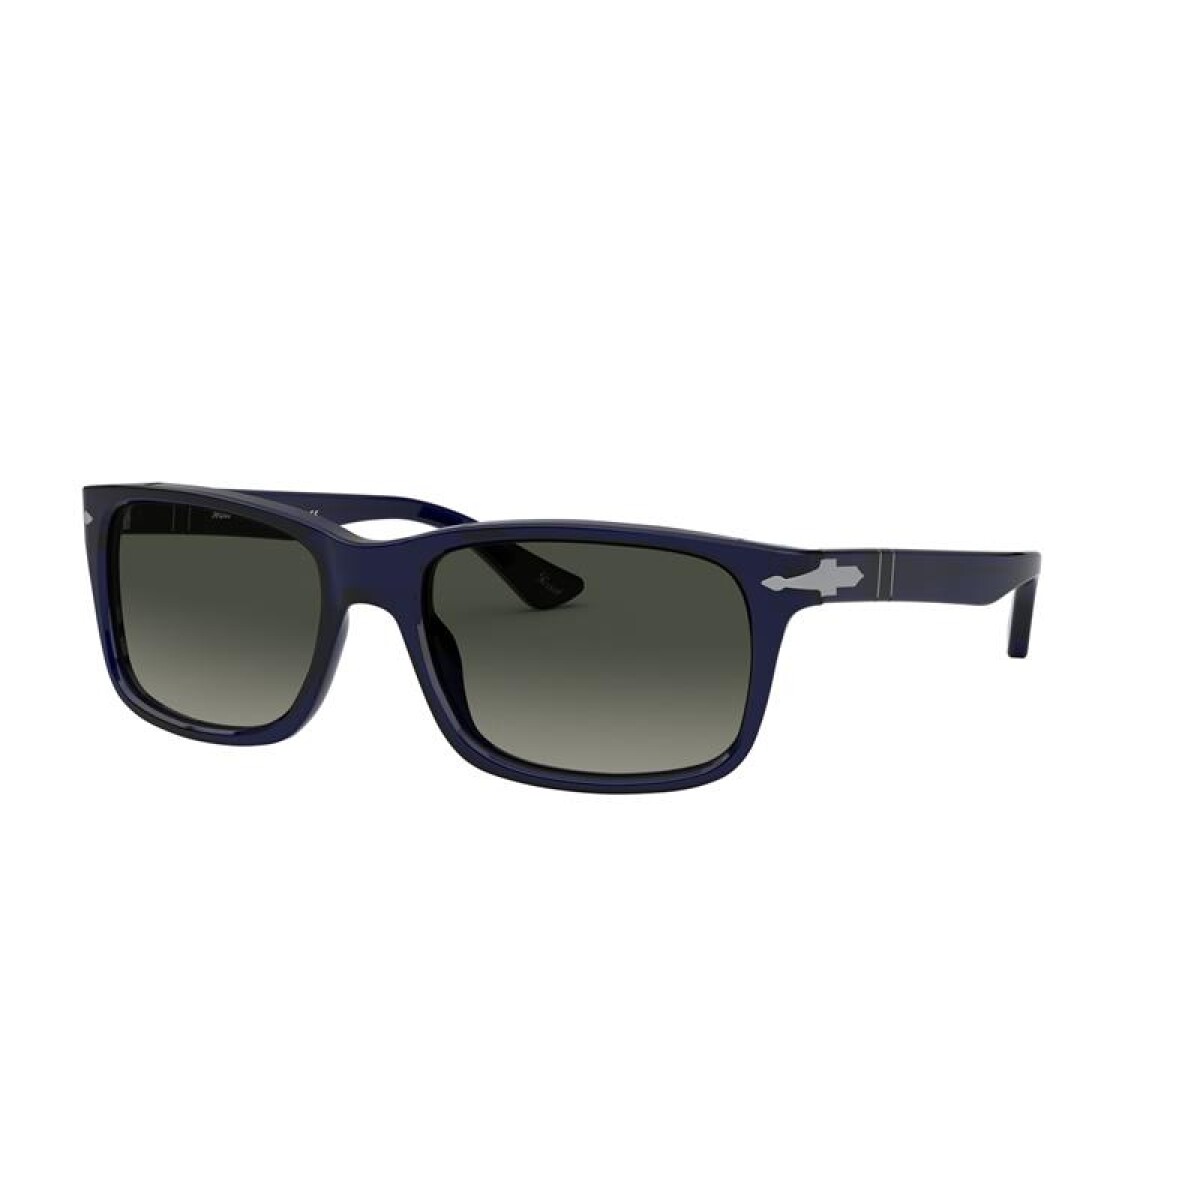 Persol 3048-s - 181/71 